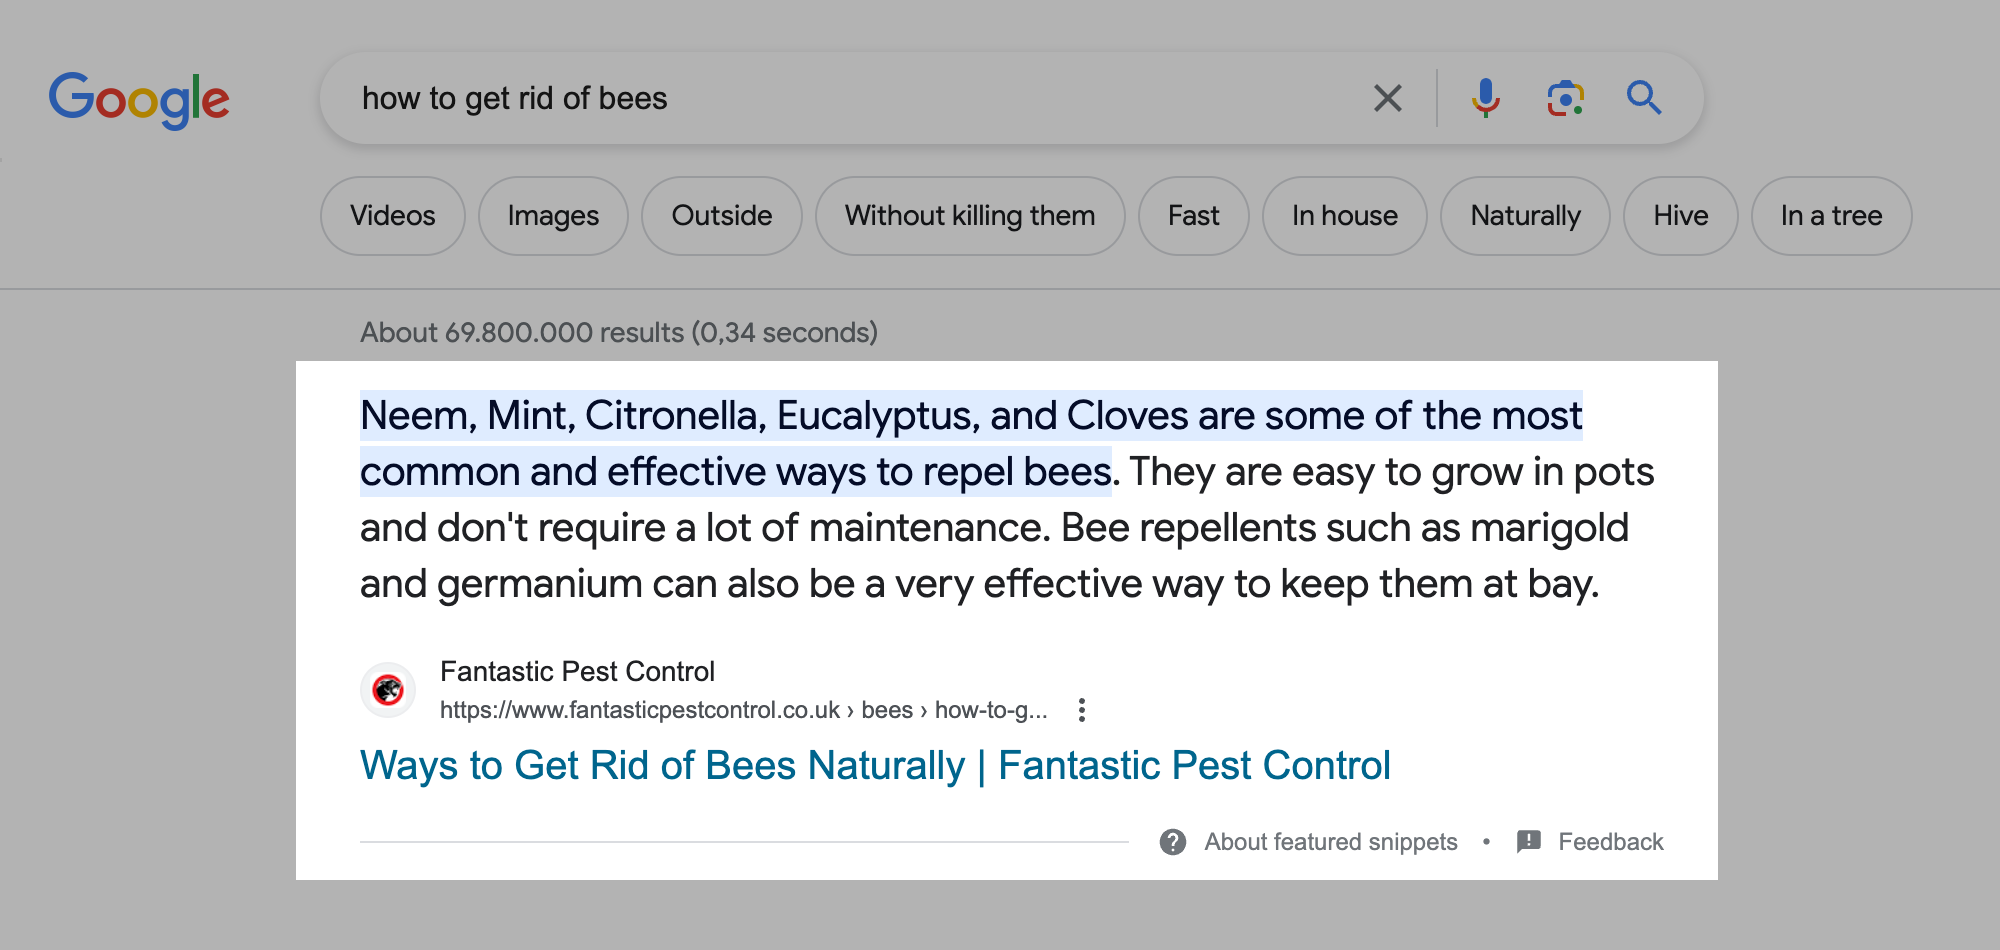 An example of a Featured Snippet in the Google search results for the search query "how to get rid of bees".